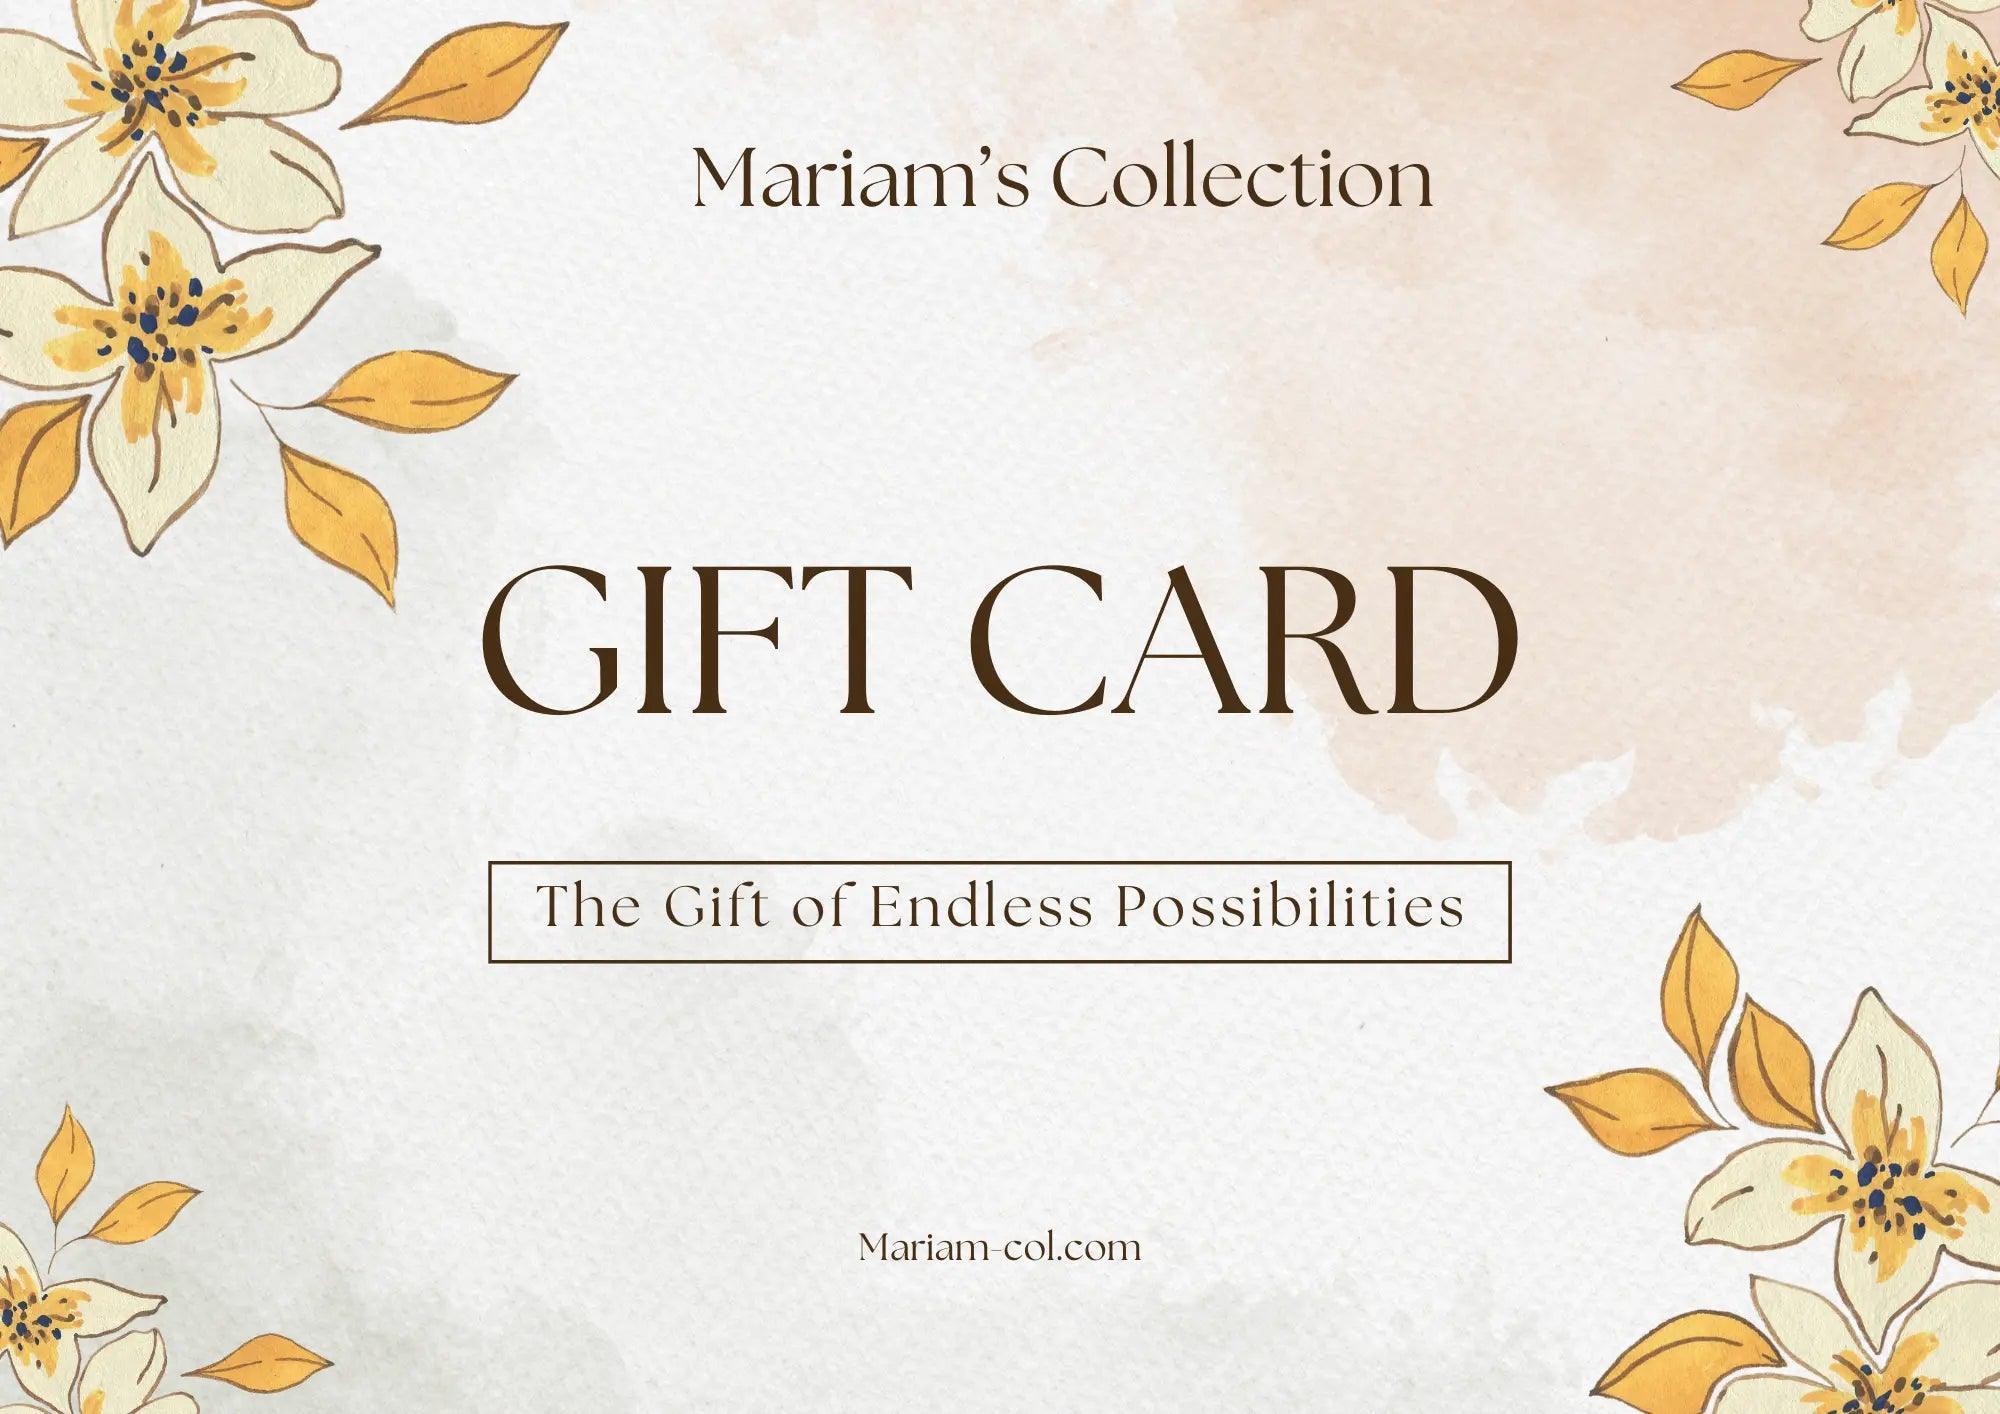 Mariam's Collection VIP Gift Card - Mariam's Collection